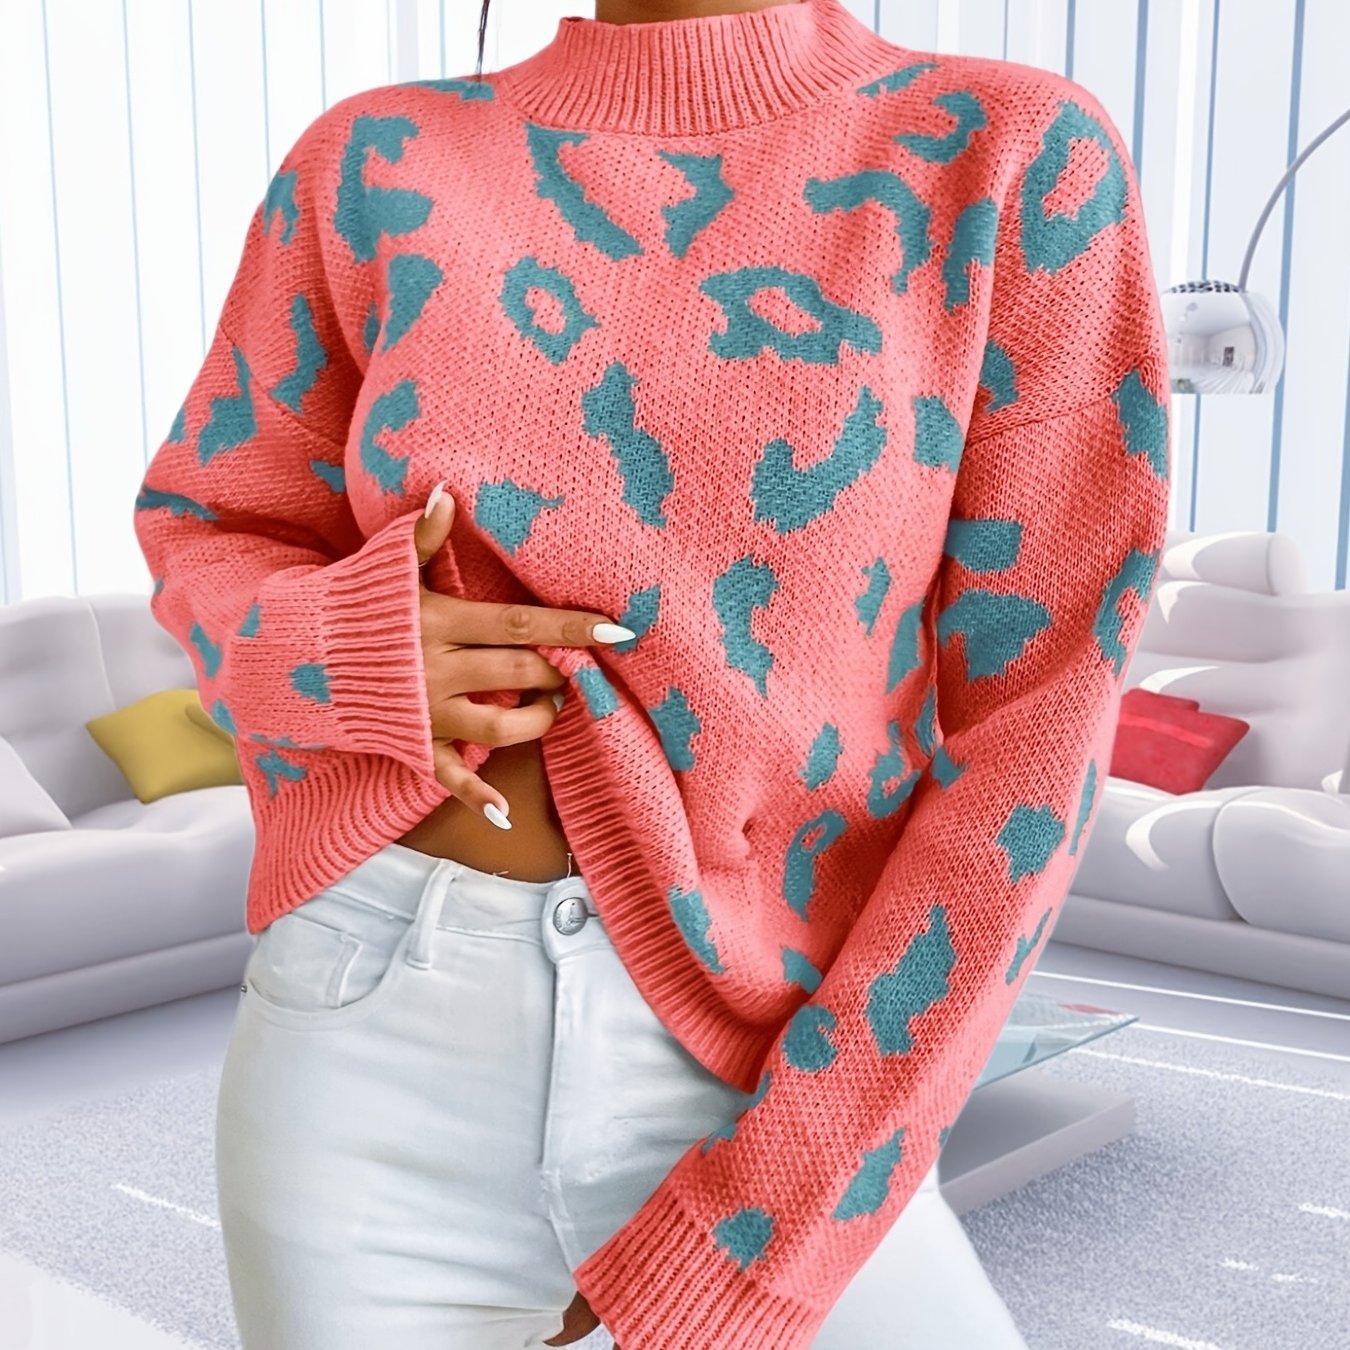 Antmvs Graphic Pattern Mock Neck Pullover Sweater, Casual Long Sleeve Sweater, Women's Clothing